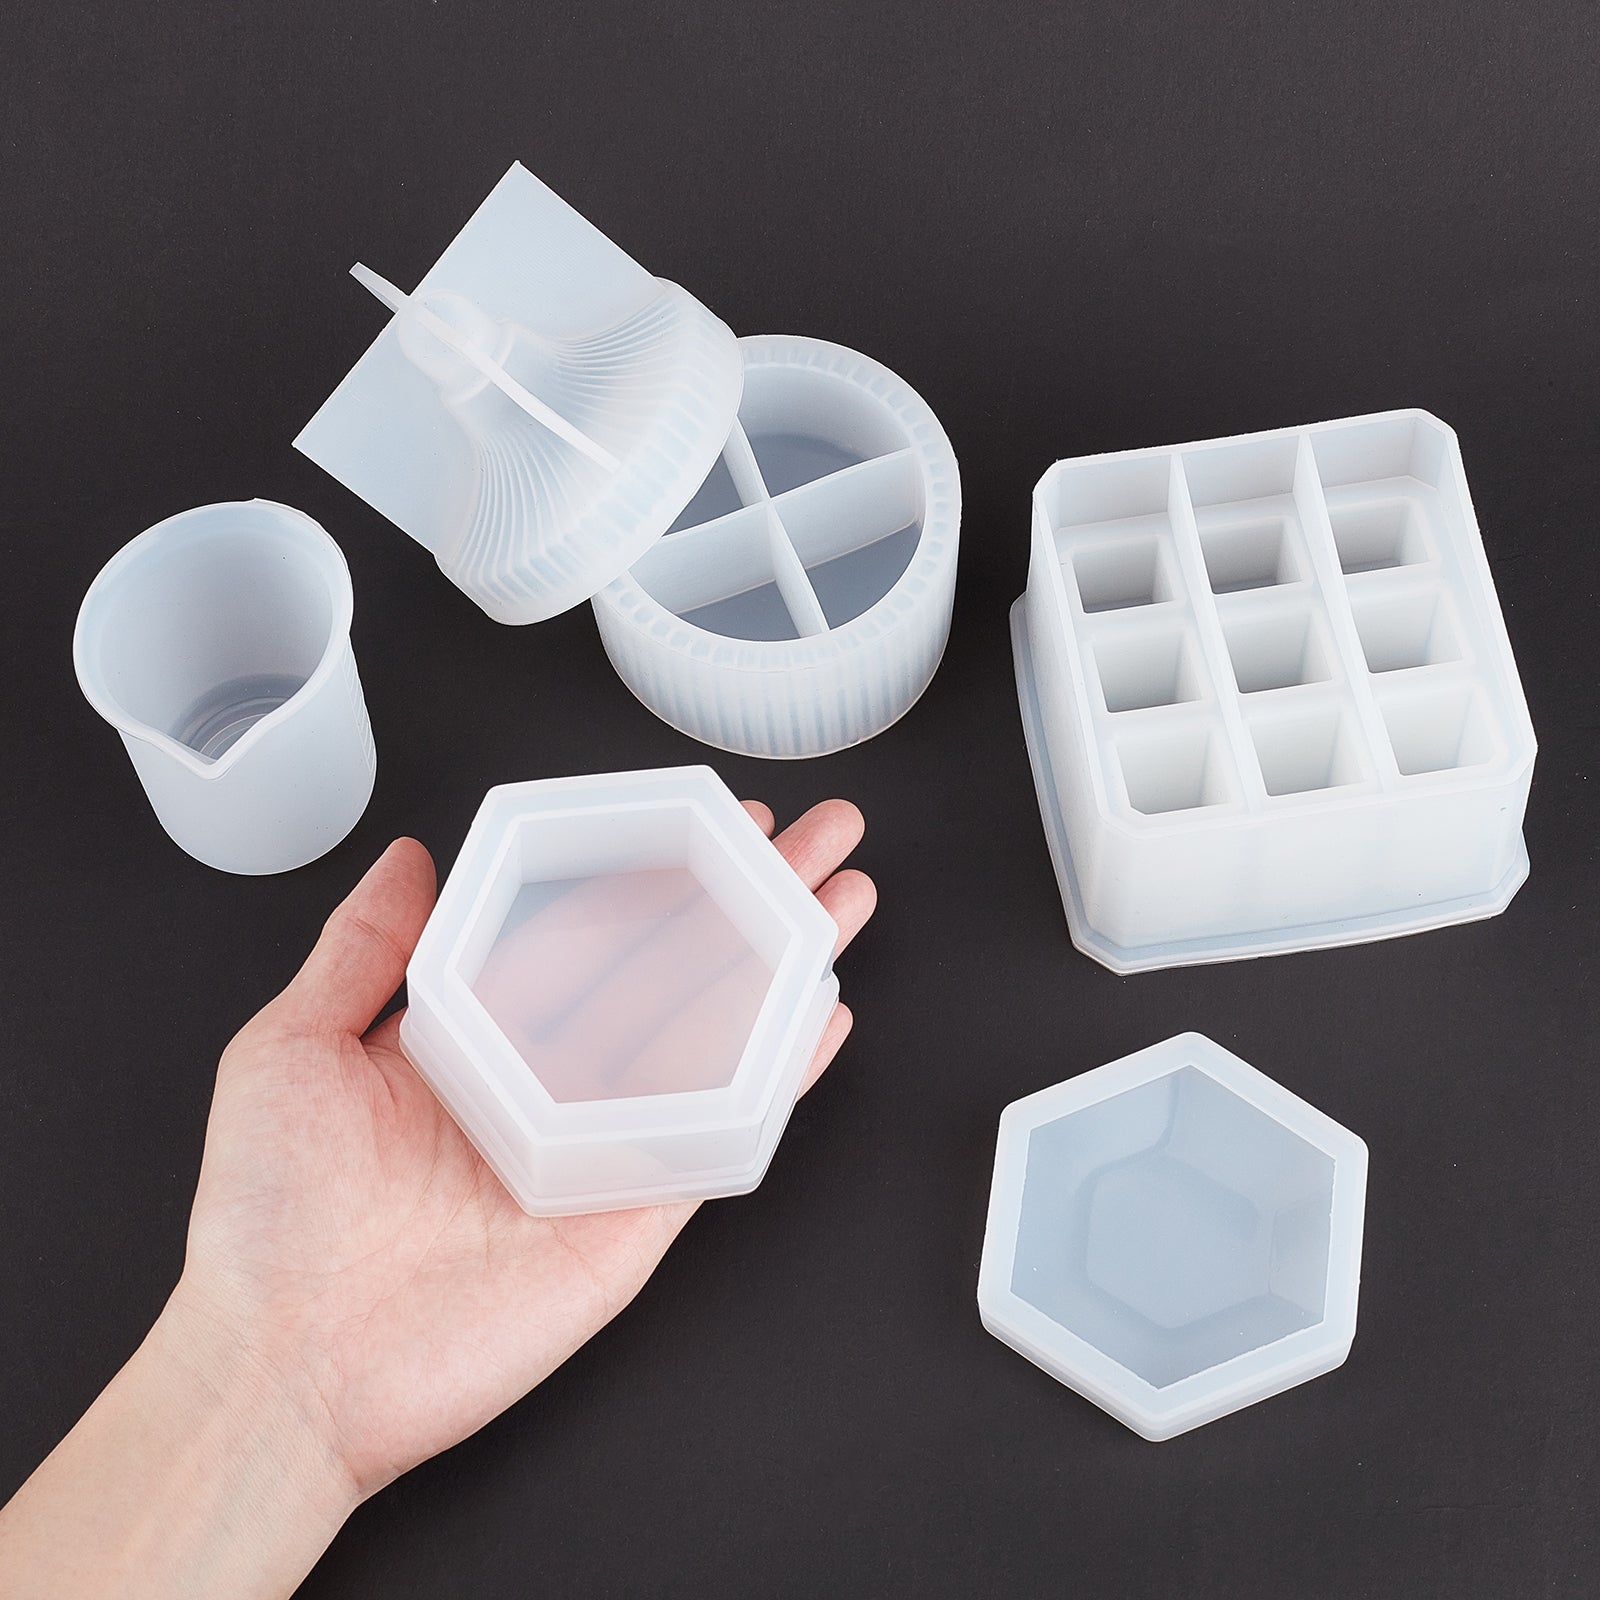 https://www.craspire.com/cdn/shop/products/diy-beauty-makeup-storage-box-epoxy-resin-crafts-kits-with-silicone-storage-box-molds-uv-gel-nail-art-tinfoil-plastic-measuring-cups-transfer-pipettes-pvc-glove-824517.jpg?v=1666924990